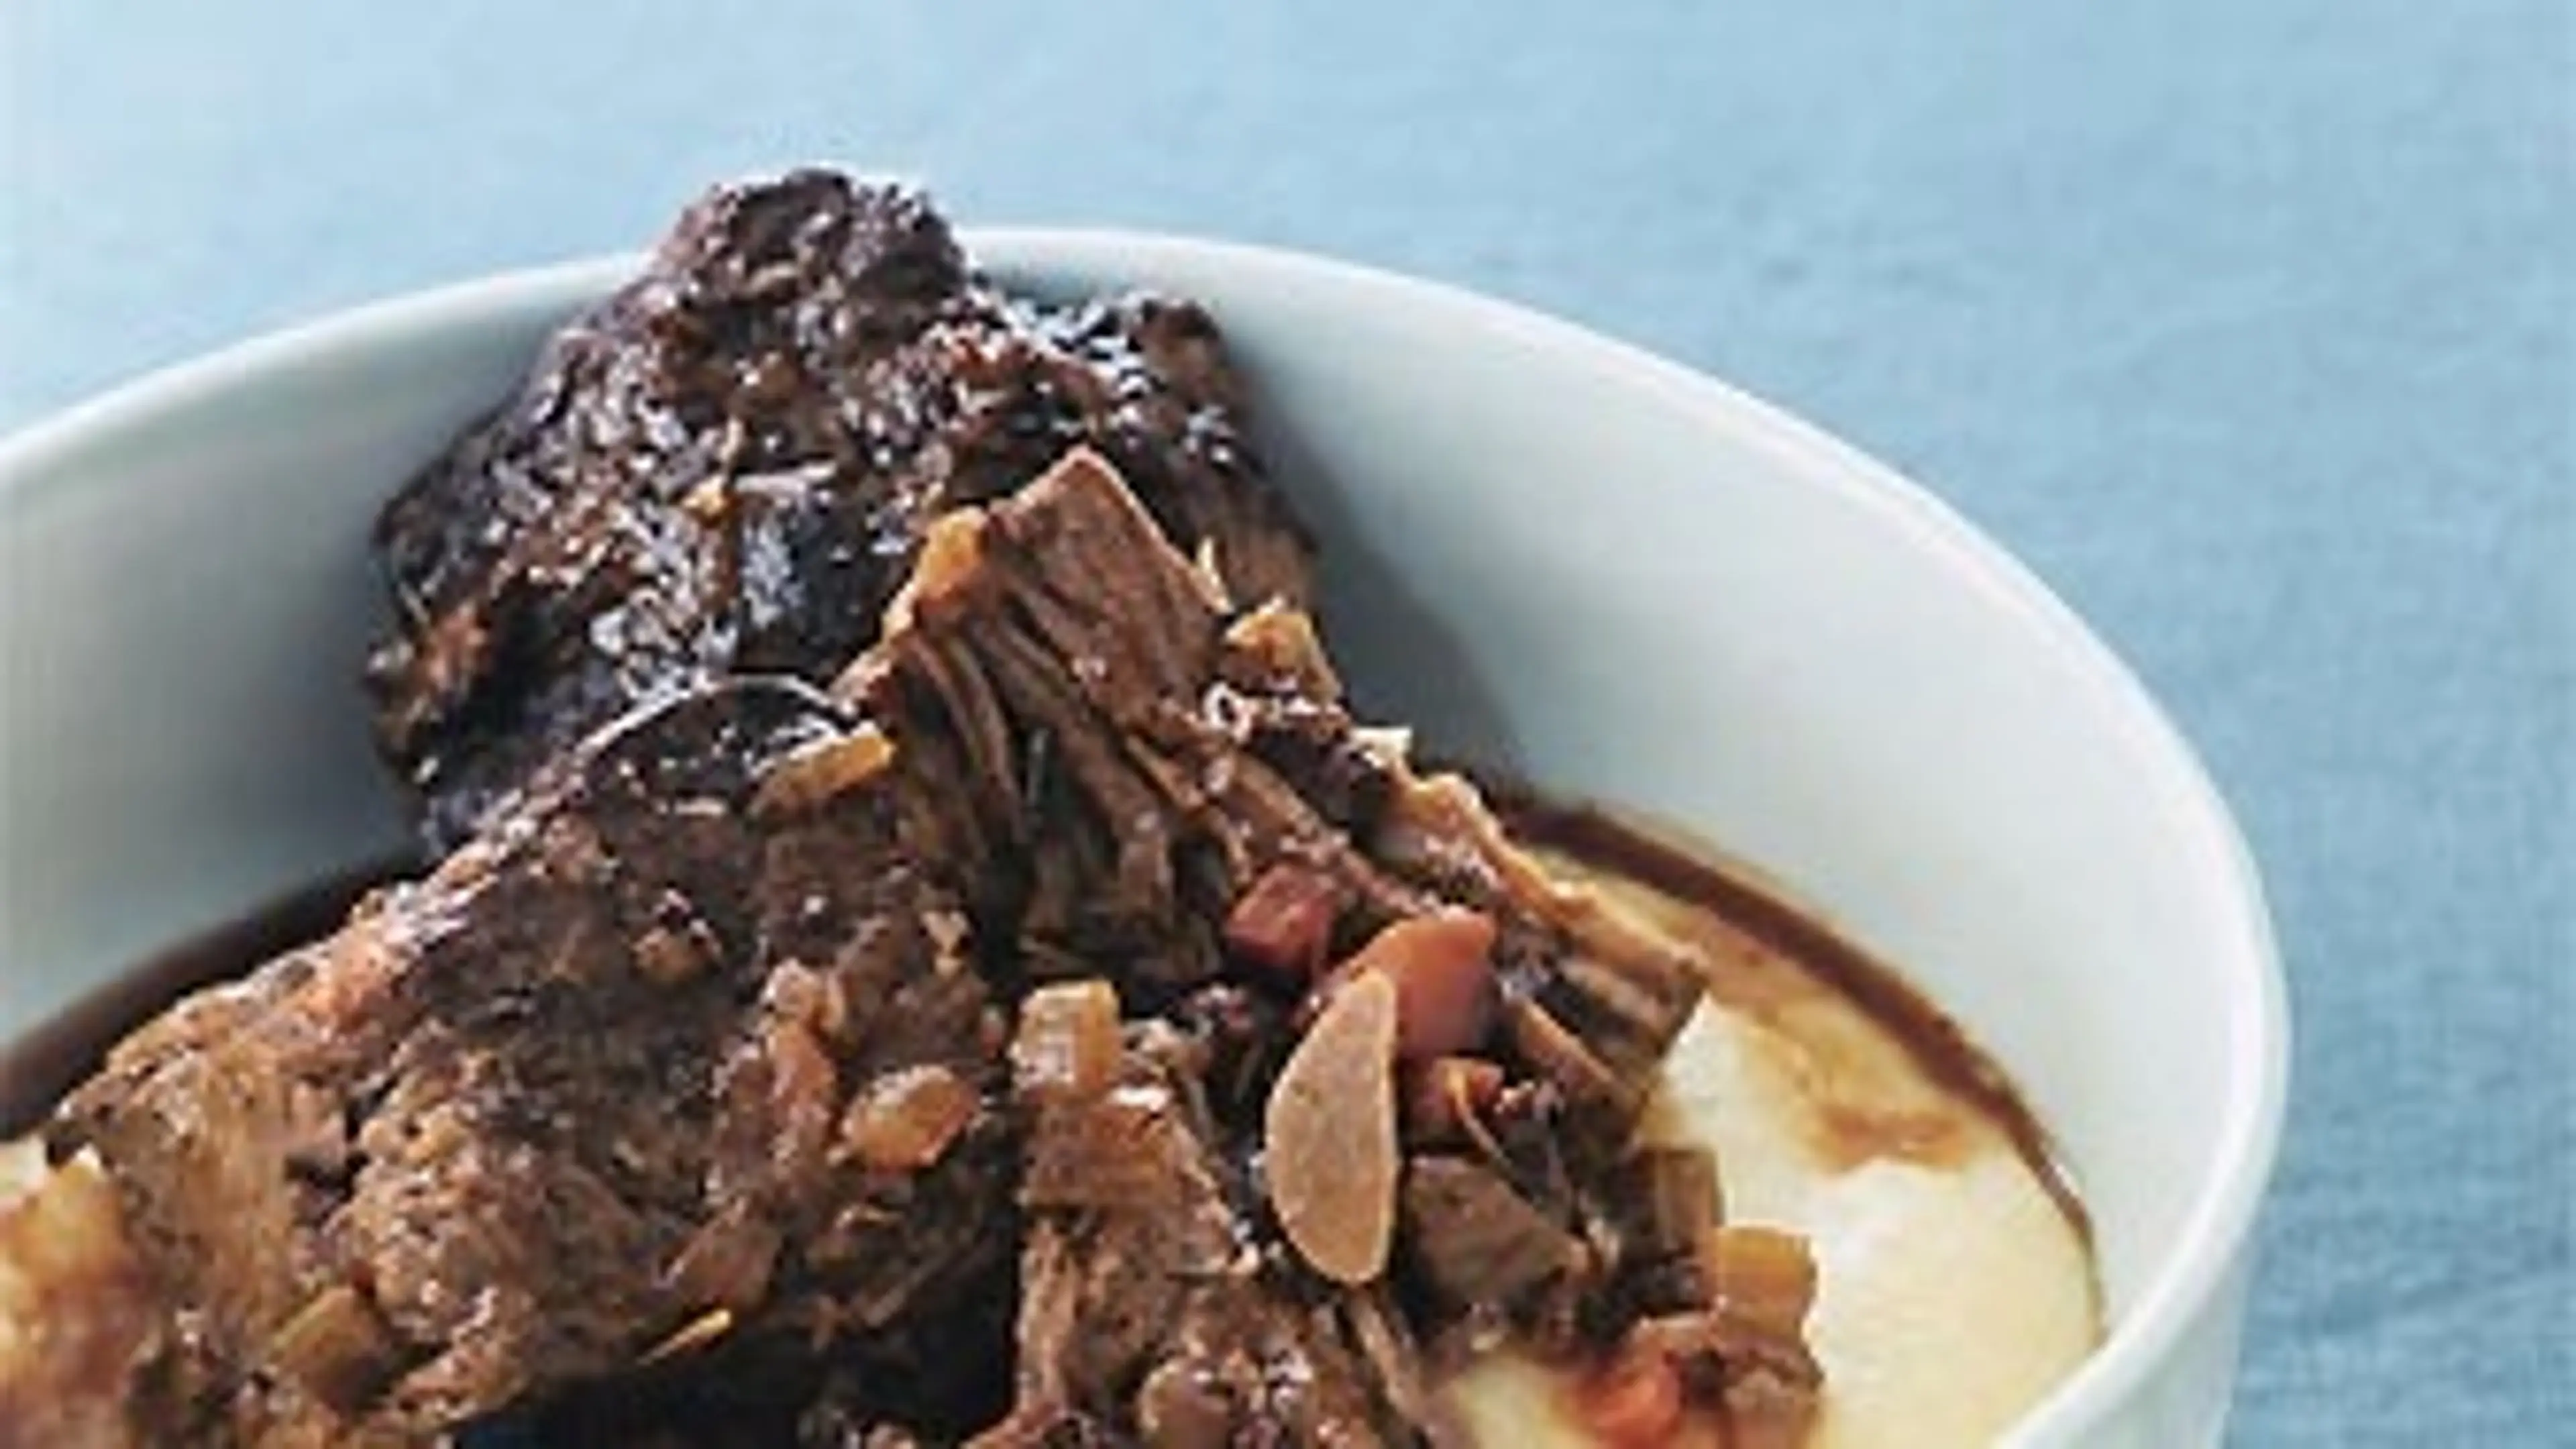 Beef Braised in Red Wine